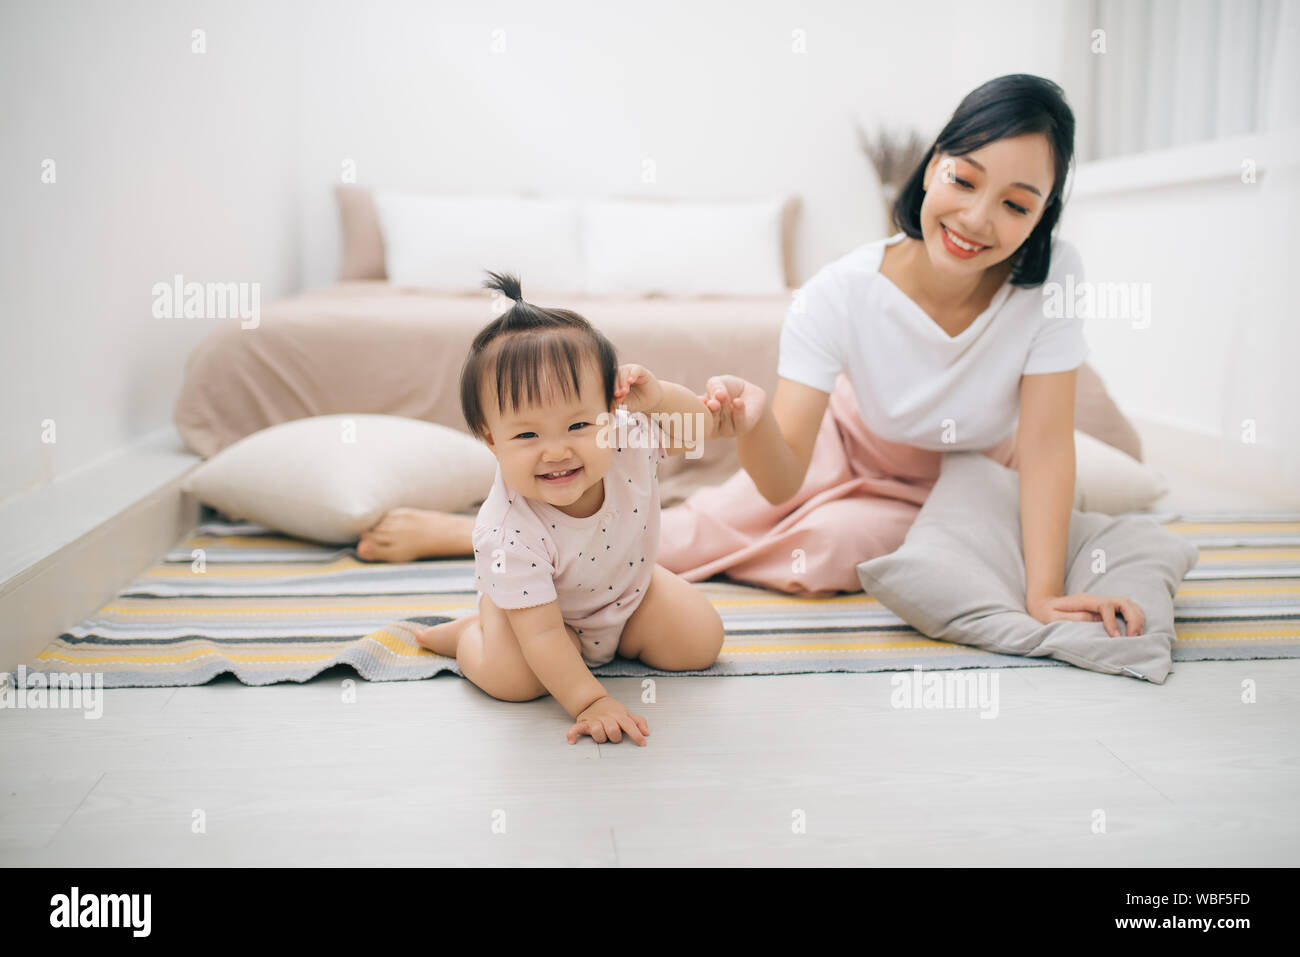 asian mother and child relaxing on the bed room Stock Photo